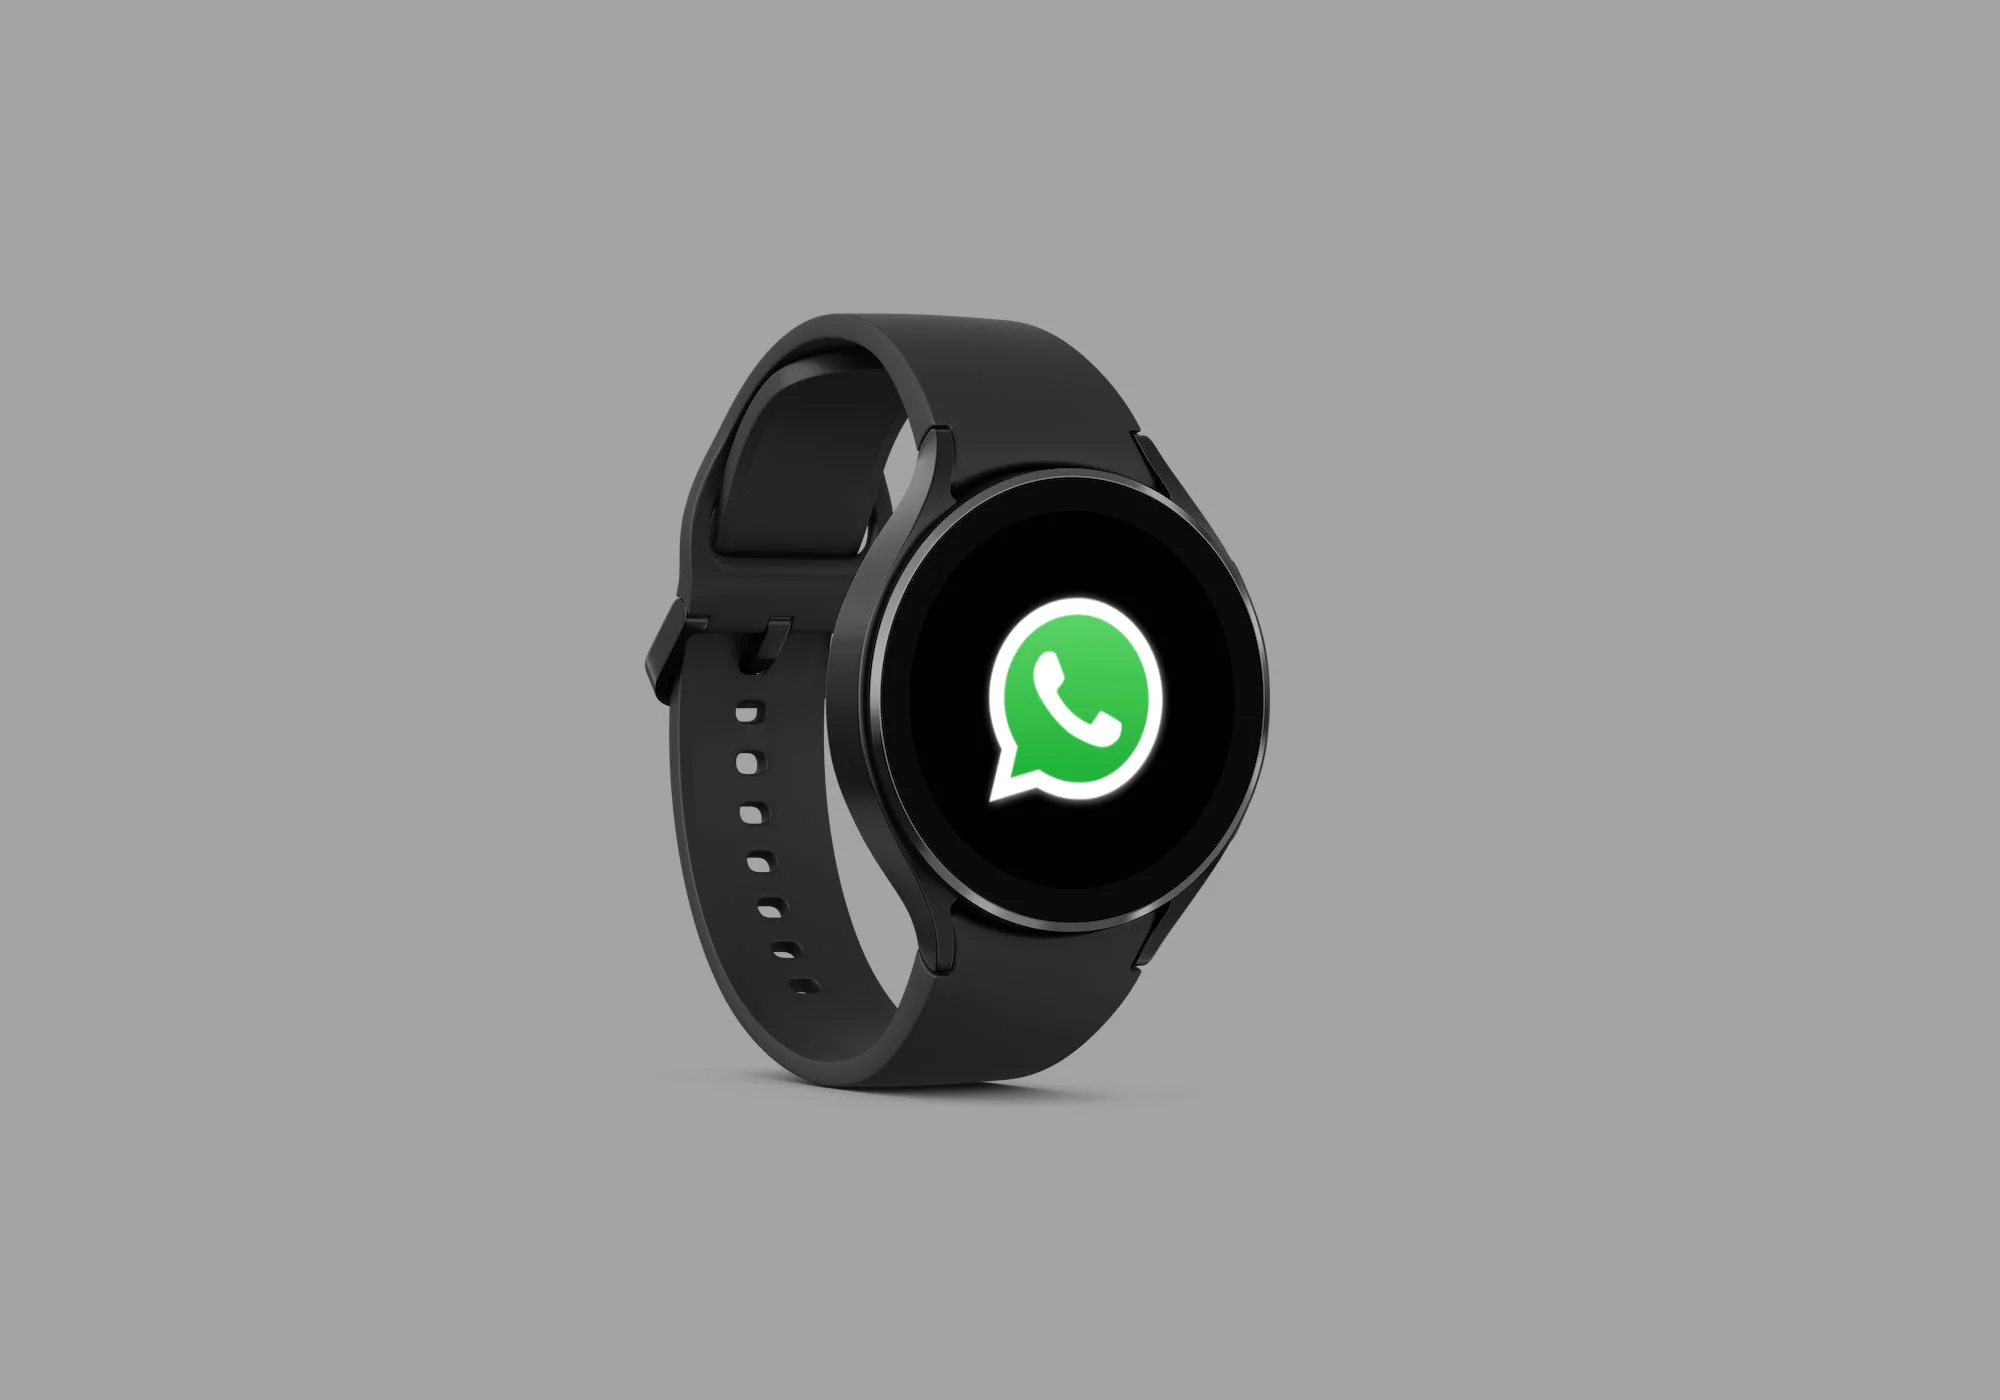 Stay connected with WhatsApp on your smartwatch.